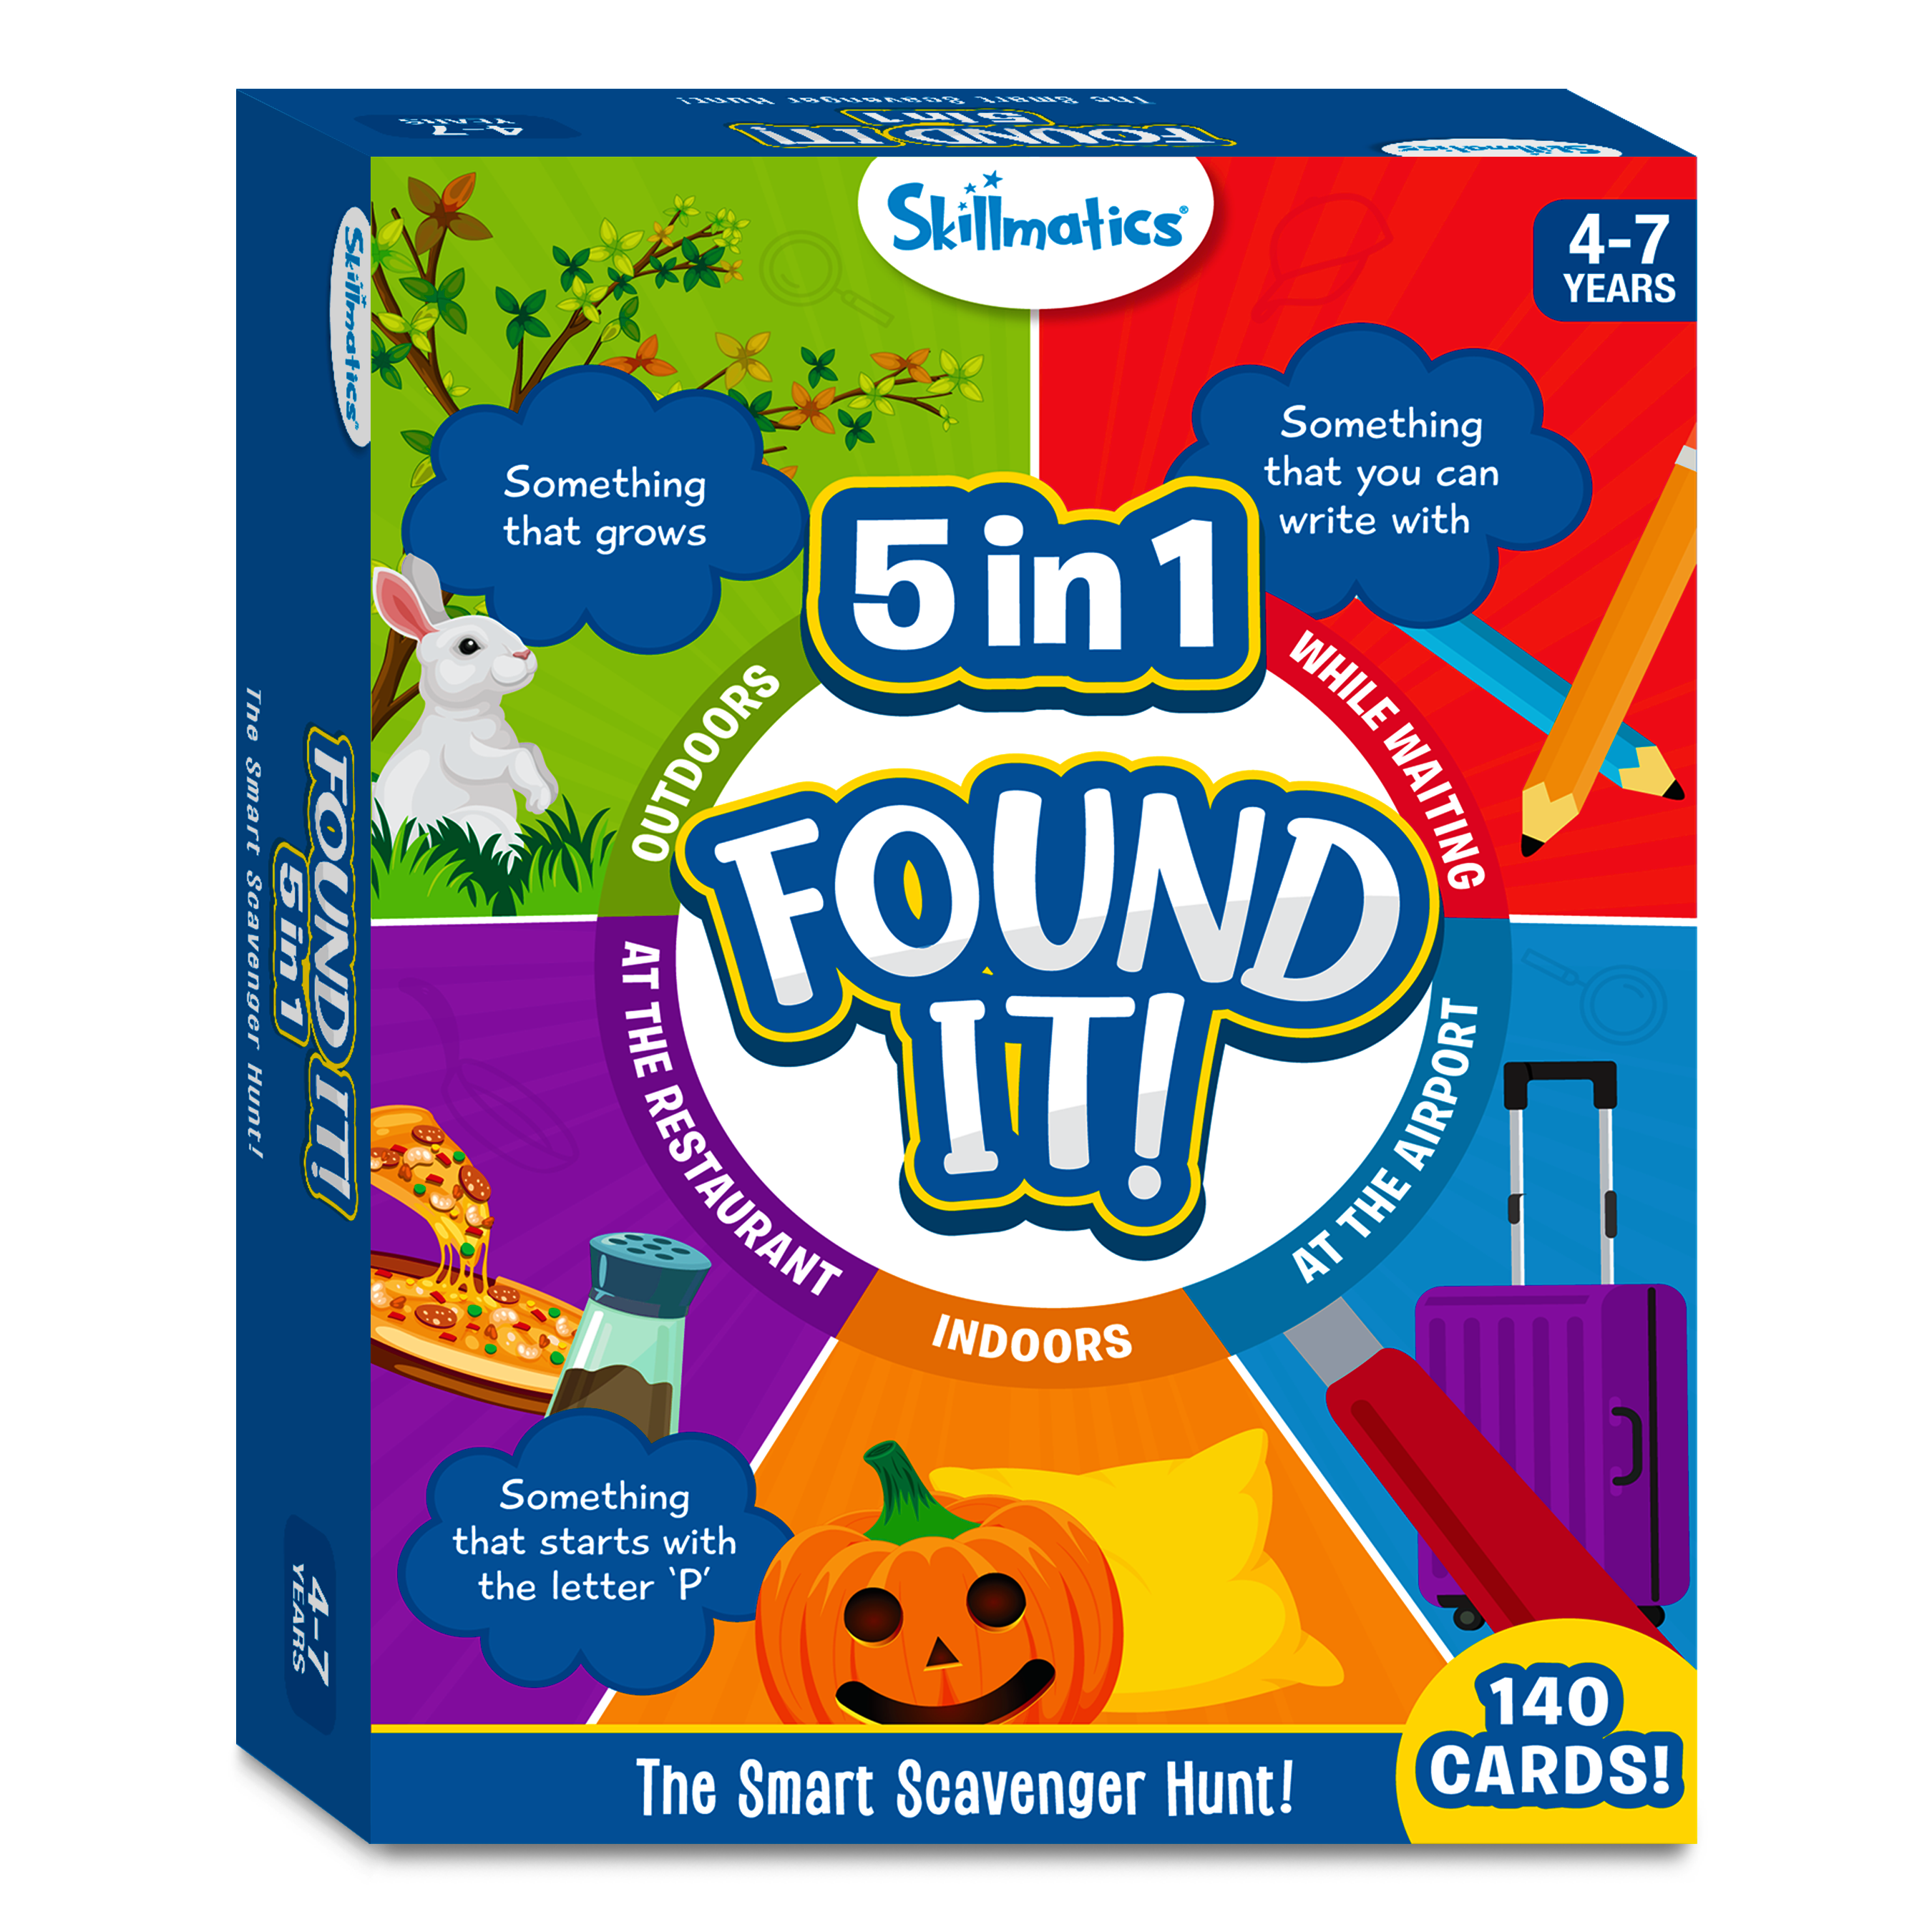 Skillmatics Card Game - Found It 5 in 1 Mega Pack, Scavenger Hunt For Kids, Fun Family Game, Gifts For Ages 4 to 7